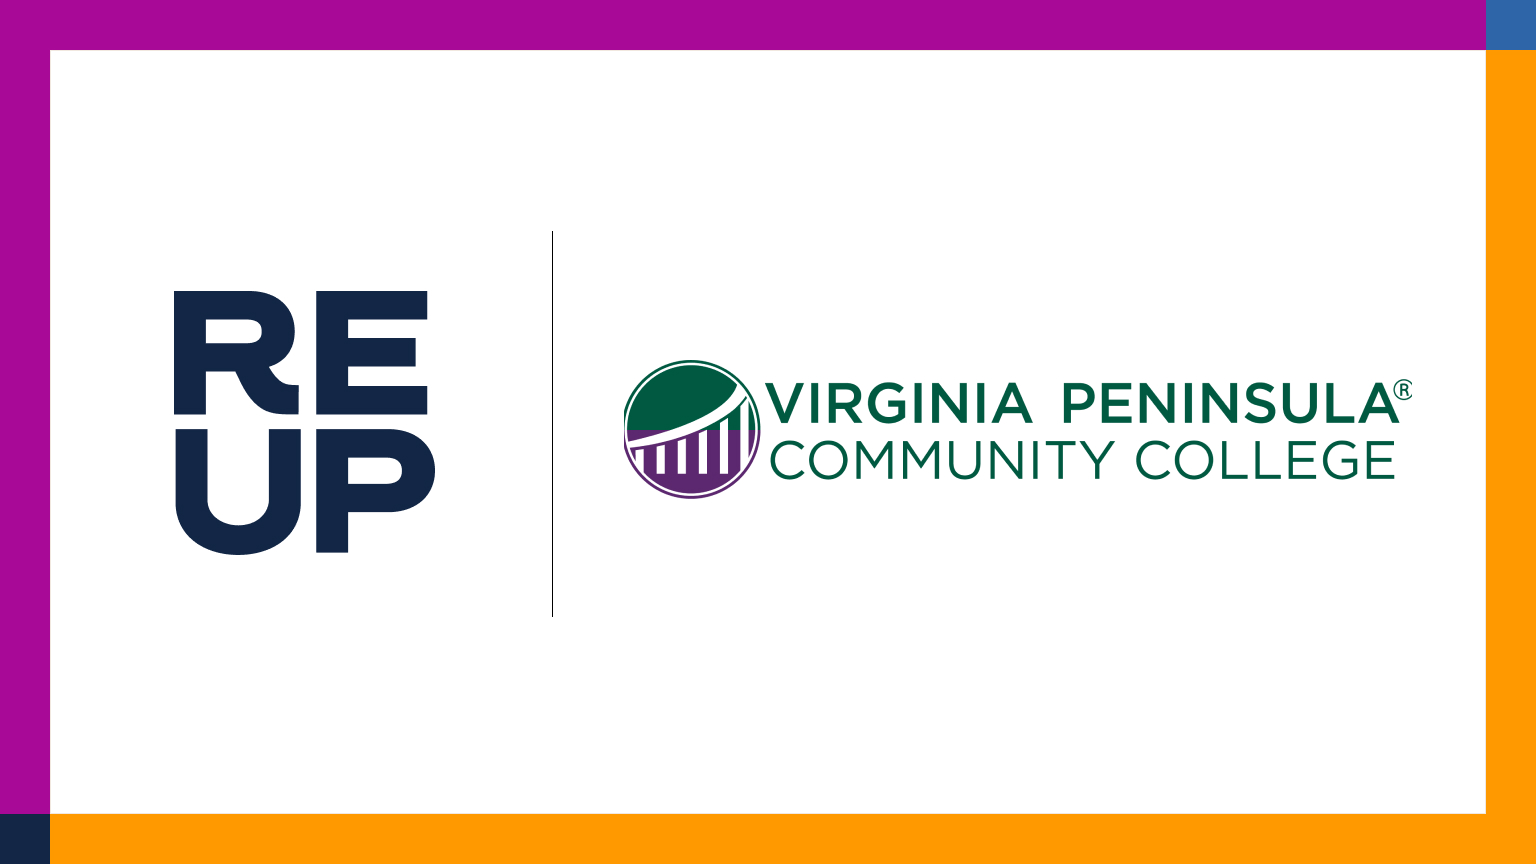 ReUp Education Partners with Virginia Peninsula Community College to Expand Opportunities to Engage and Support Adult Learners